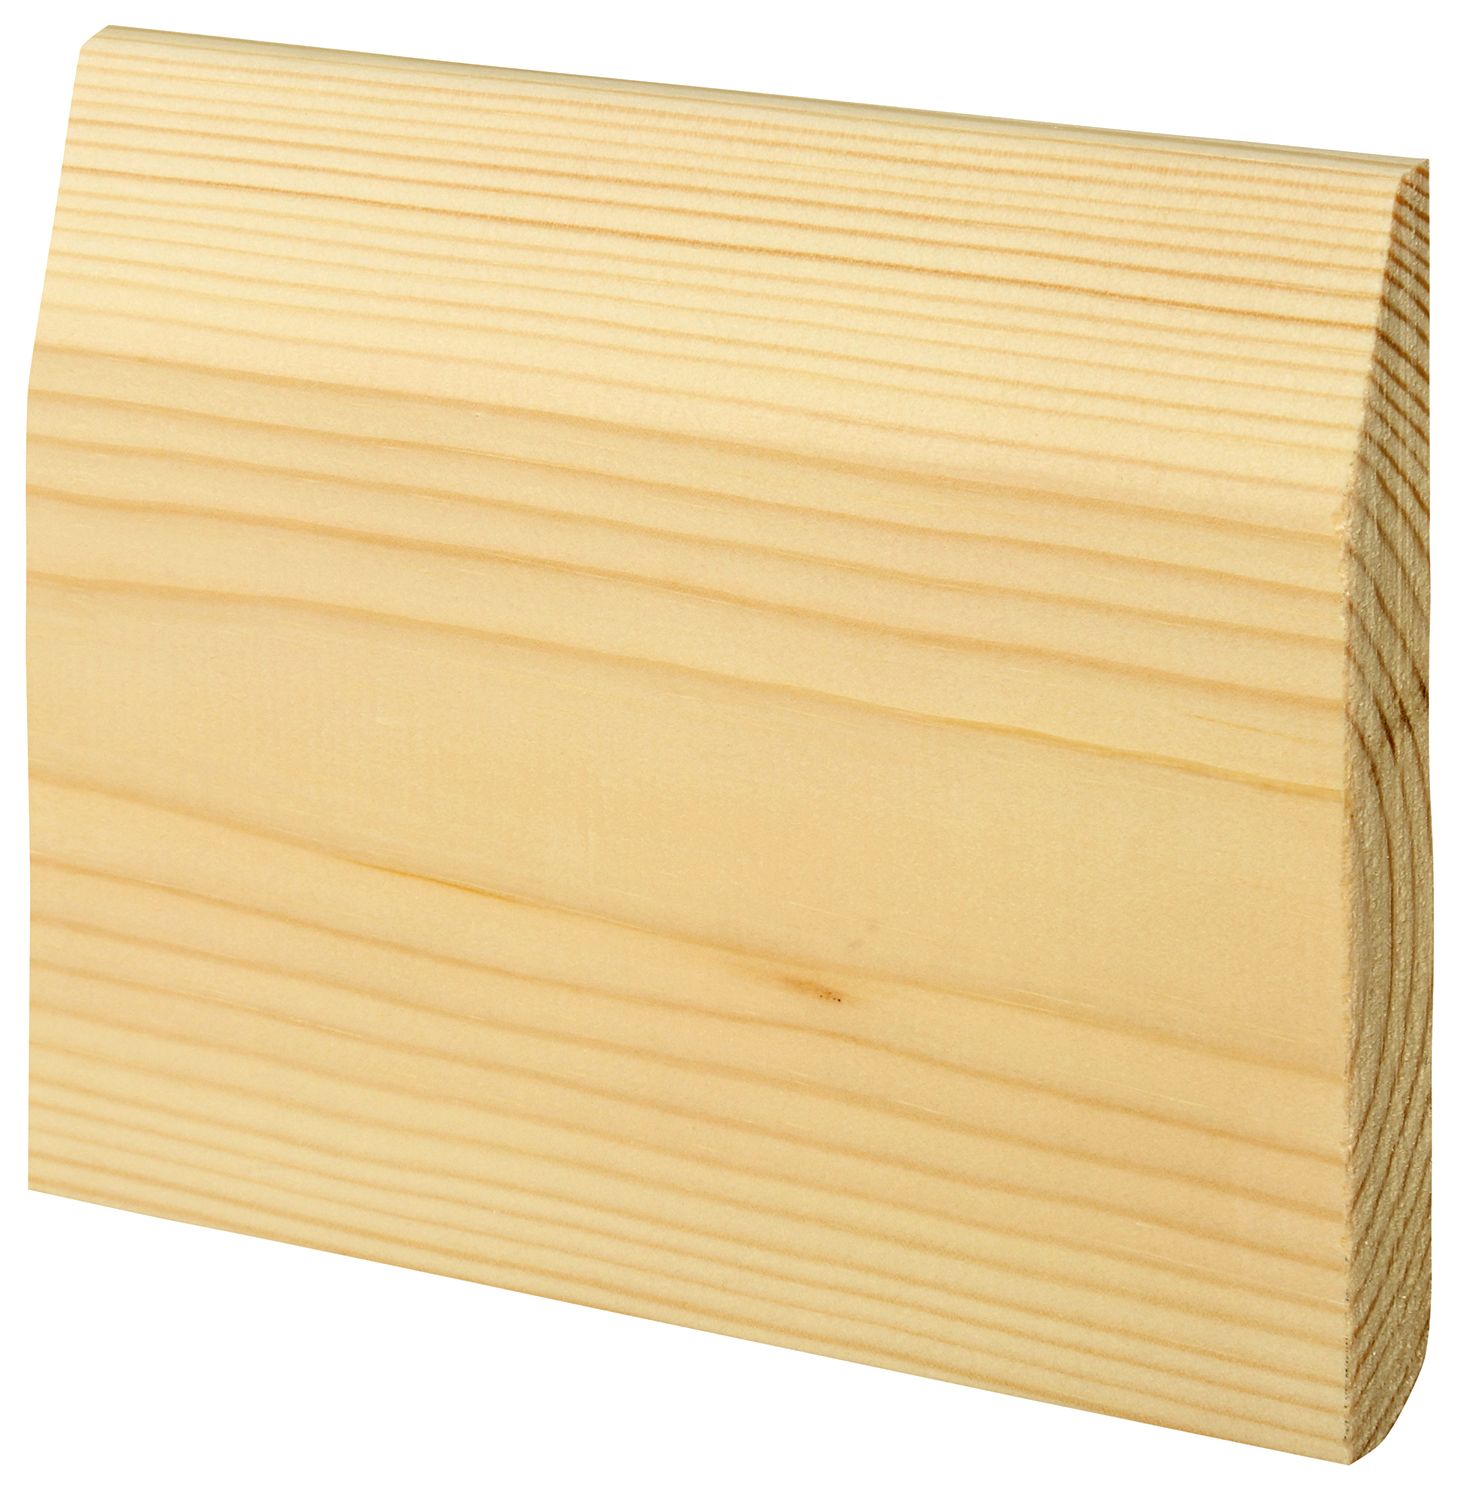 Image of Wickes Dual Purpose Chamfered/Bullnose Pine Skirting 19 x 144 x 3600 mm